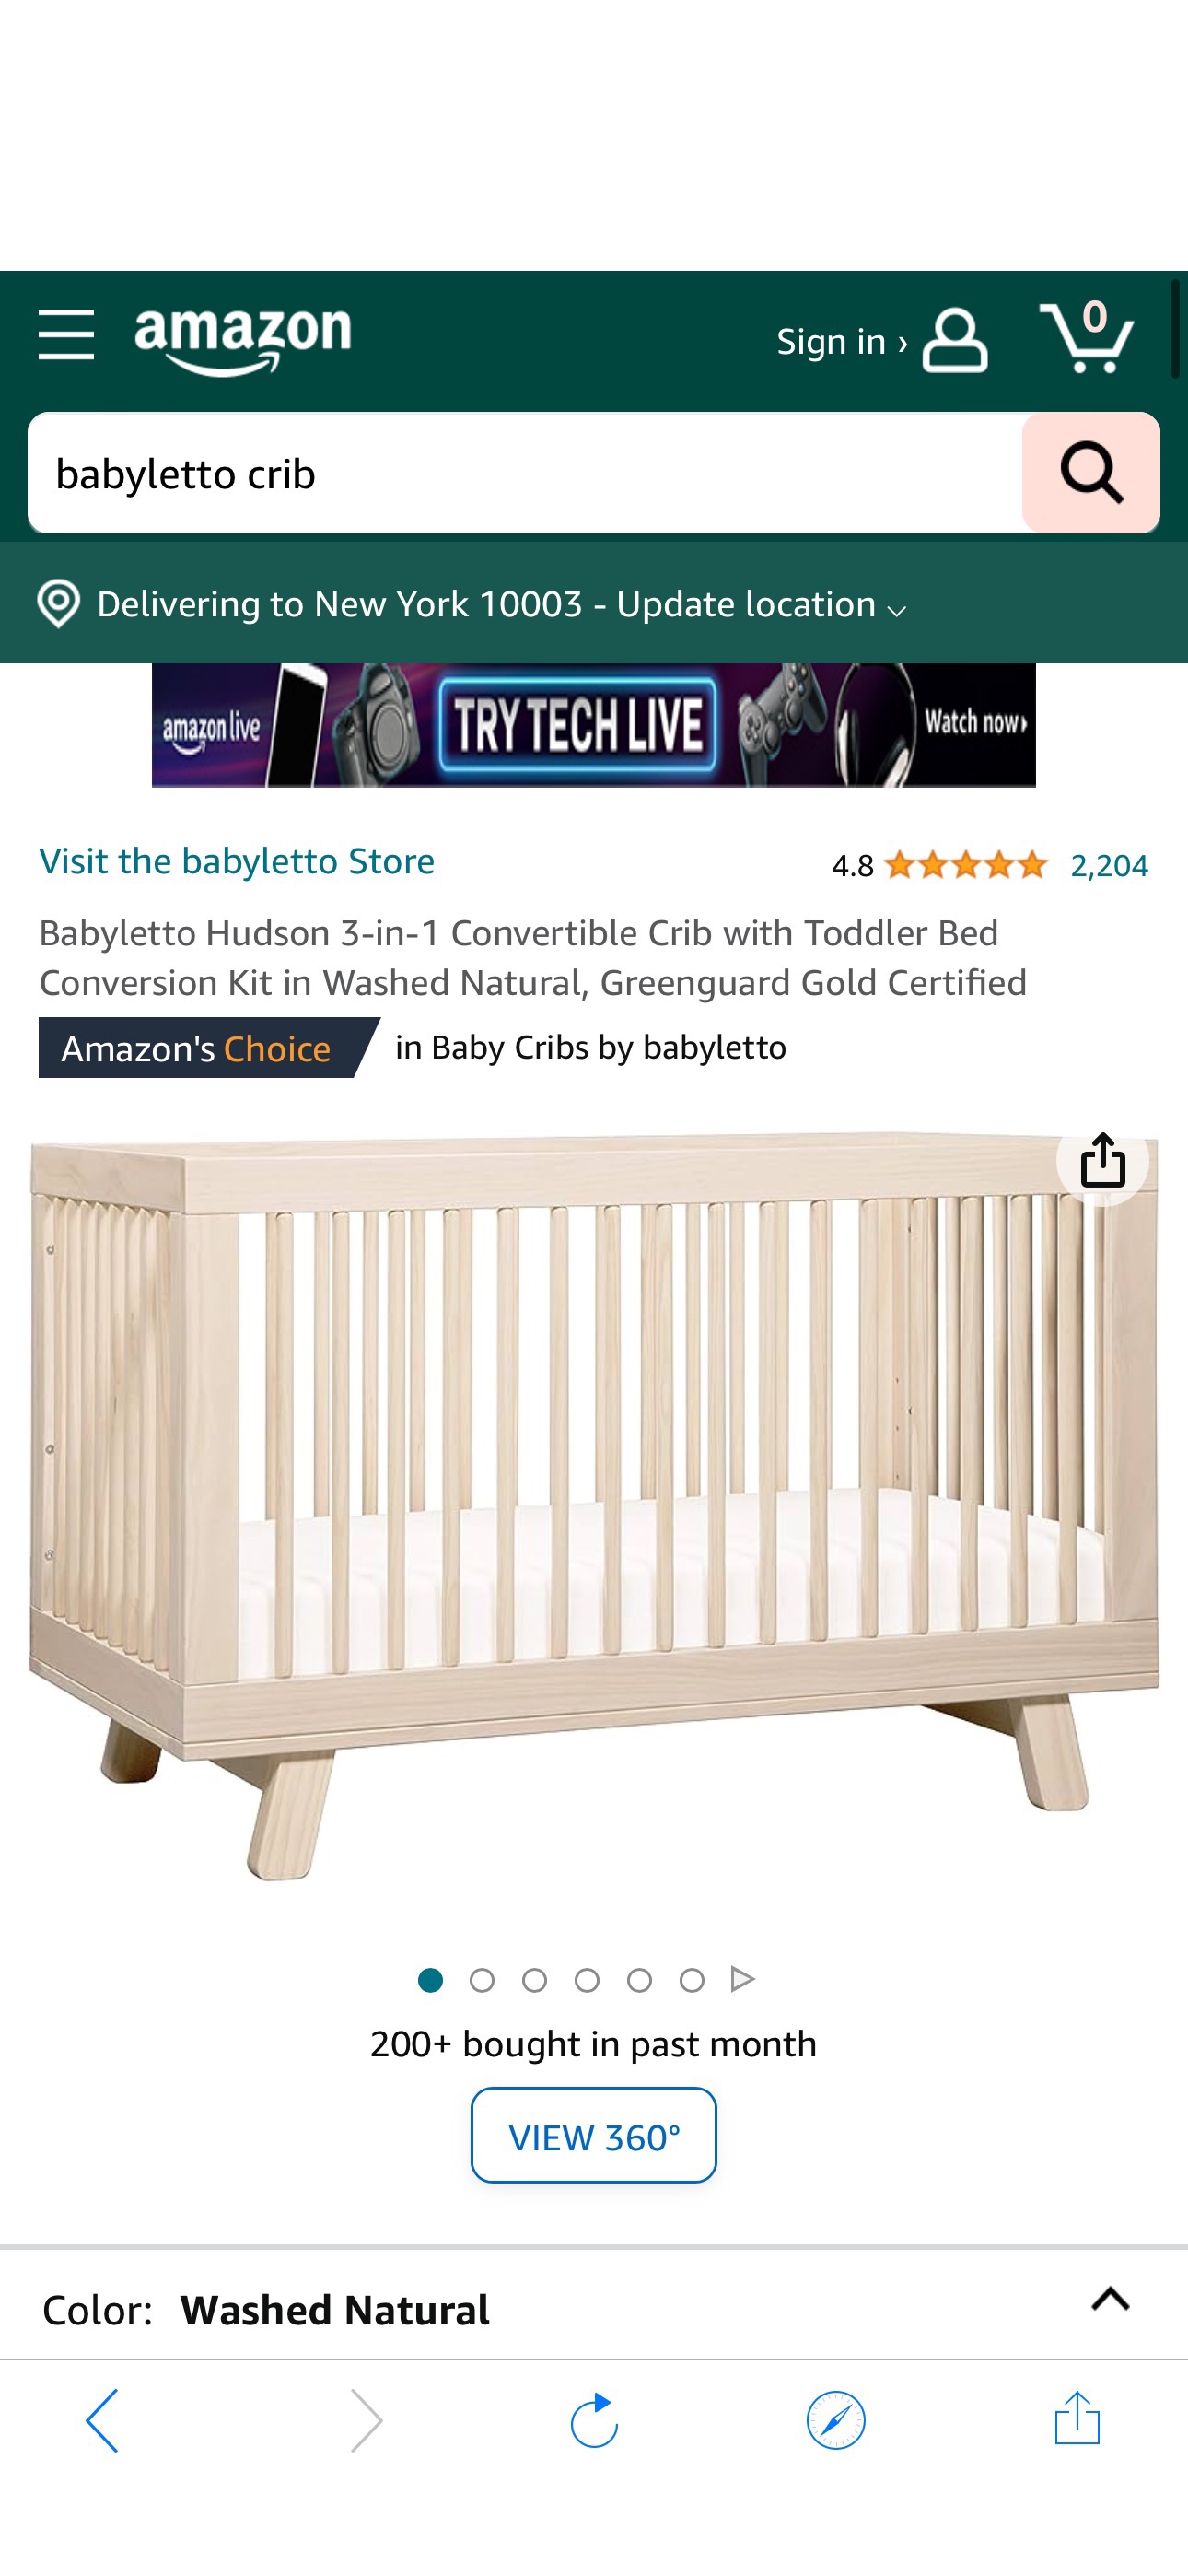 Amazon.com : Babyletto Hudson 3-in-1 Convertible Crib with Toddler Bed Conversion Kit in White, Greenguard Gold Certified , 53.75x29.75x35 Inch (Pack of 1) : Baby